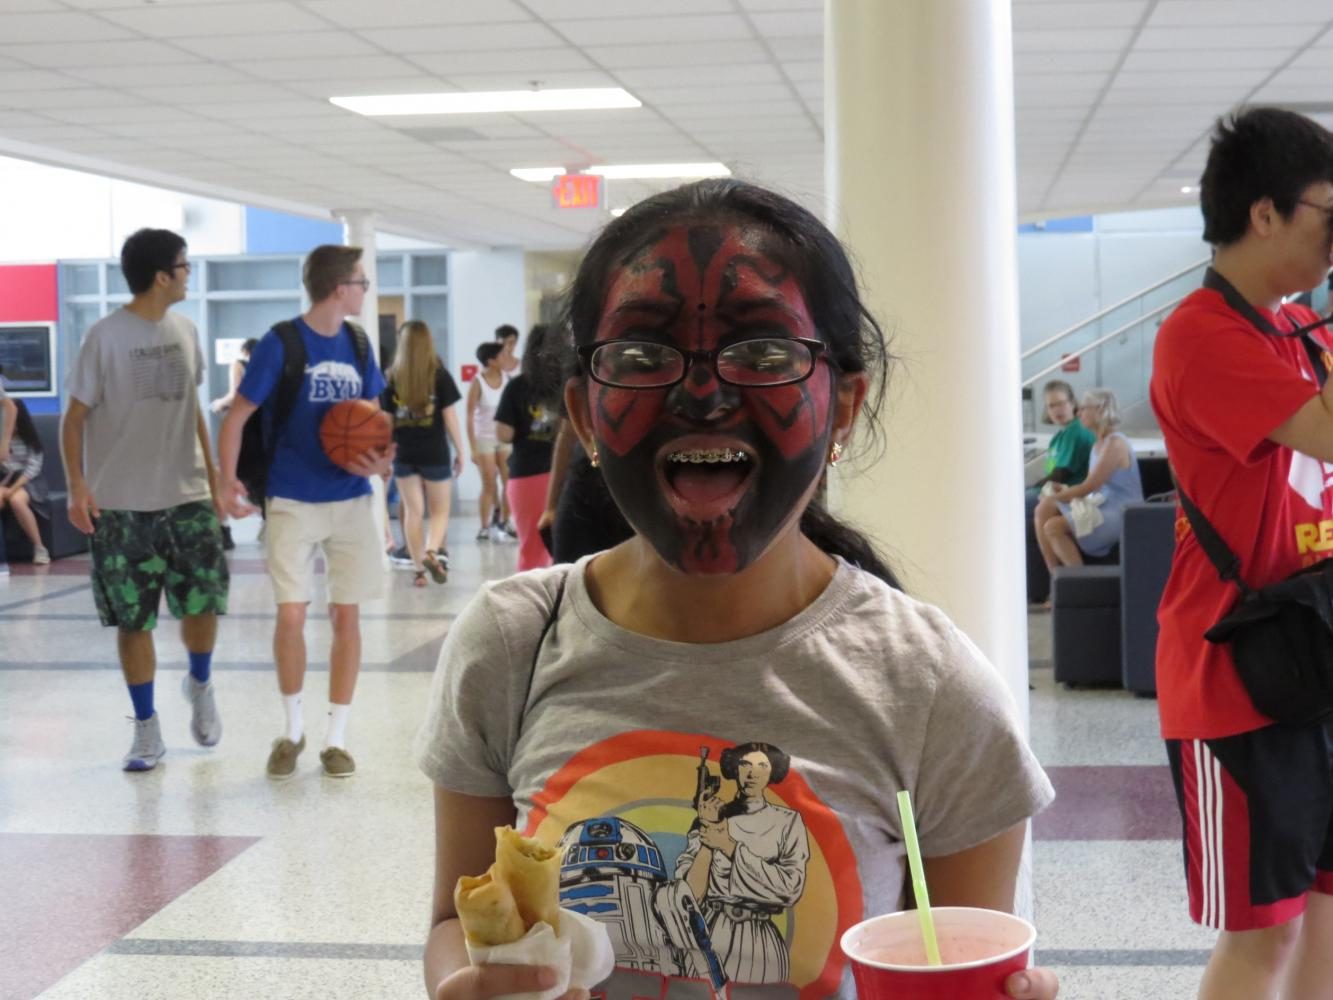 Sophomore Ankita Vadiala grins with a Star Wars t-shirt, face paint, and an armful of food and drink.